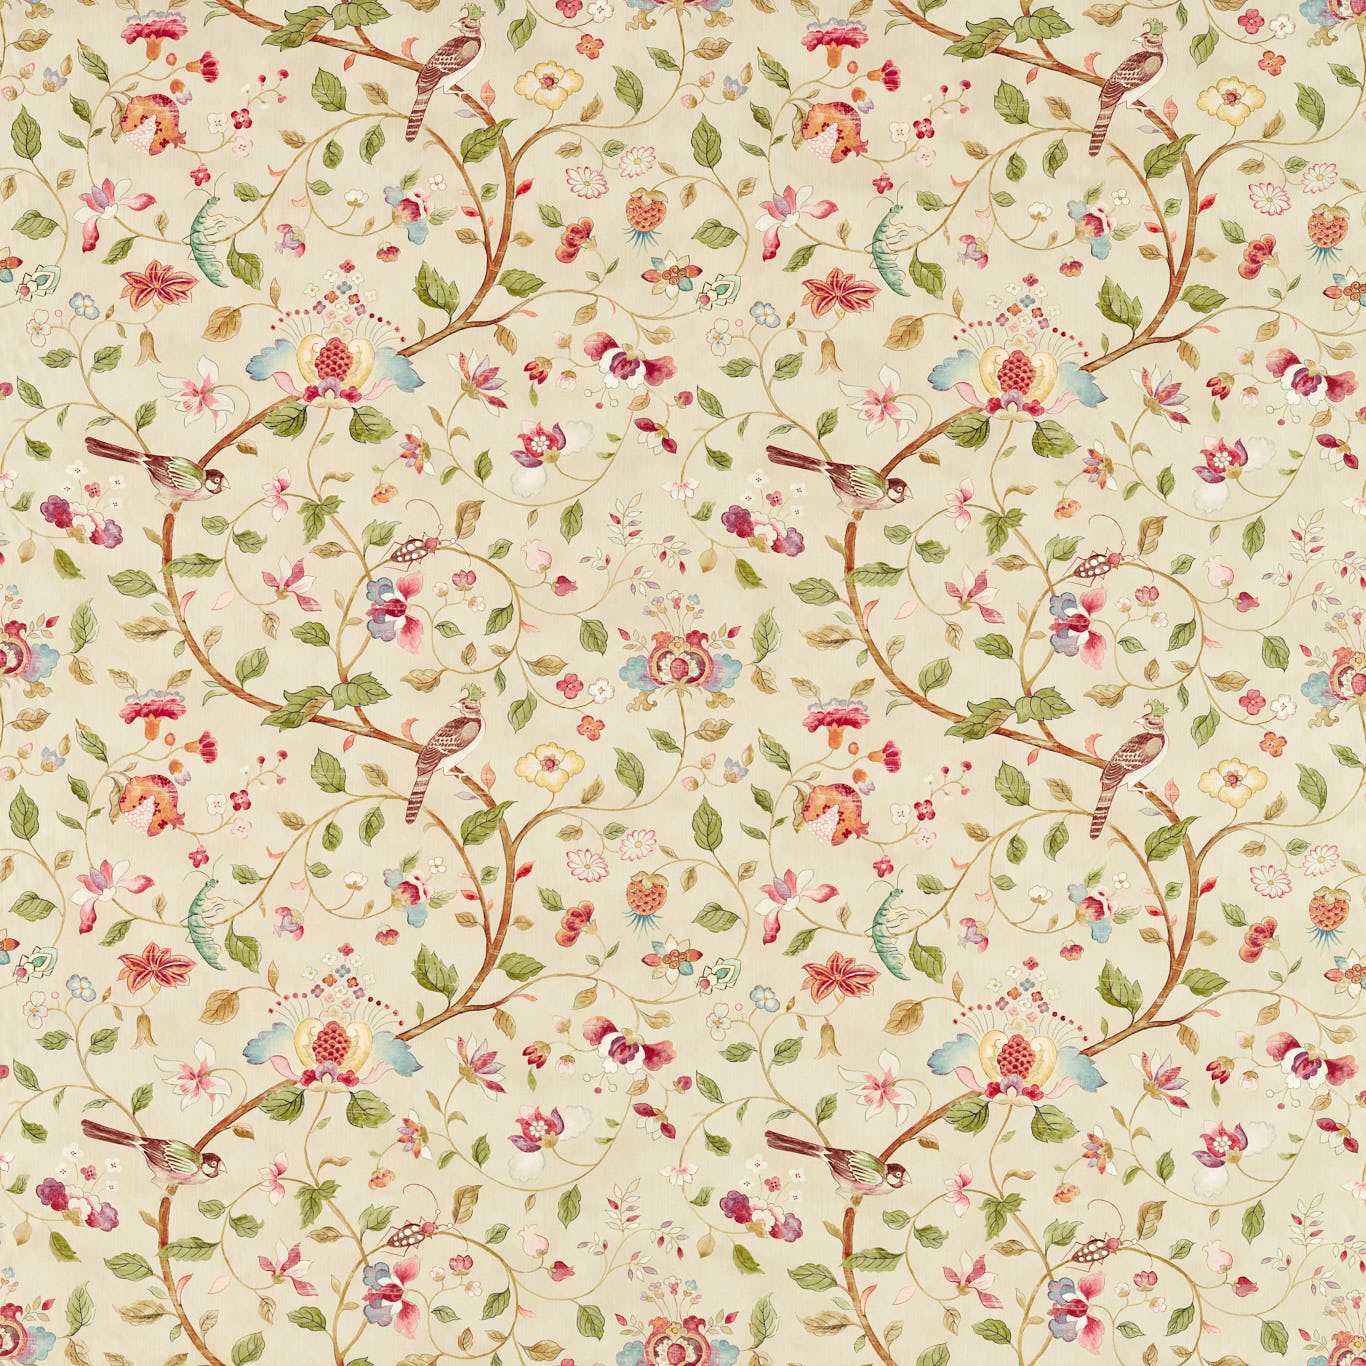 Aril's Garden Olive/Mulberry Fabric by SAN